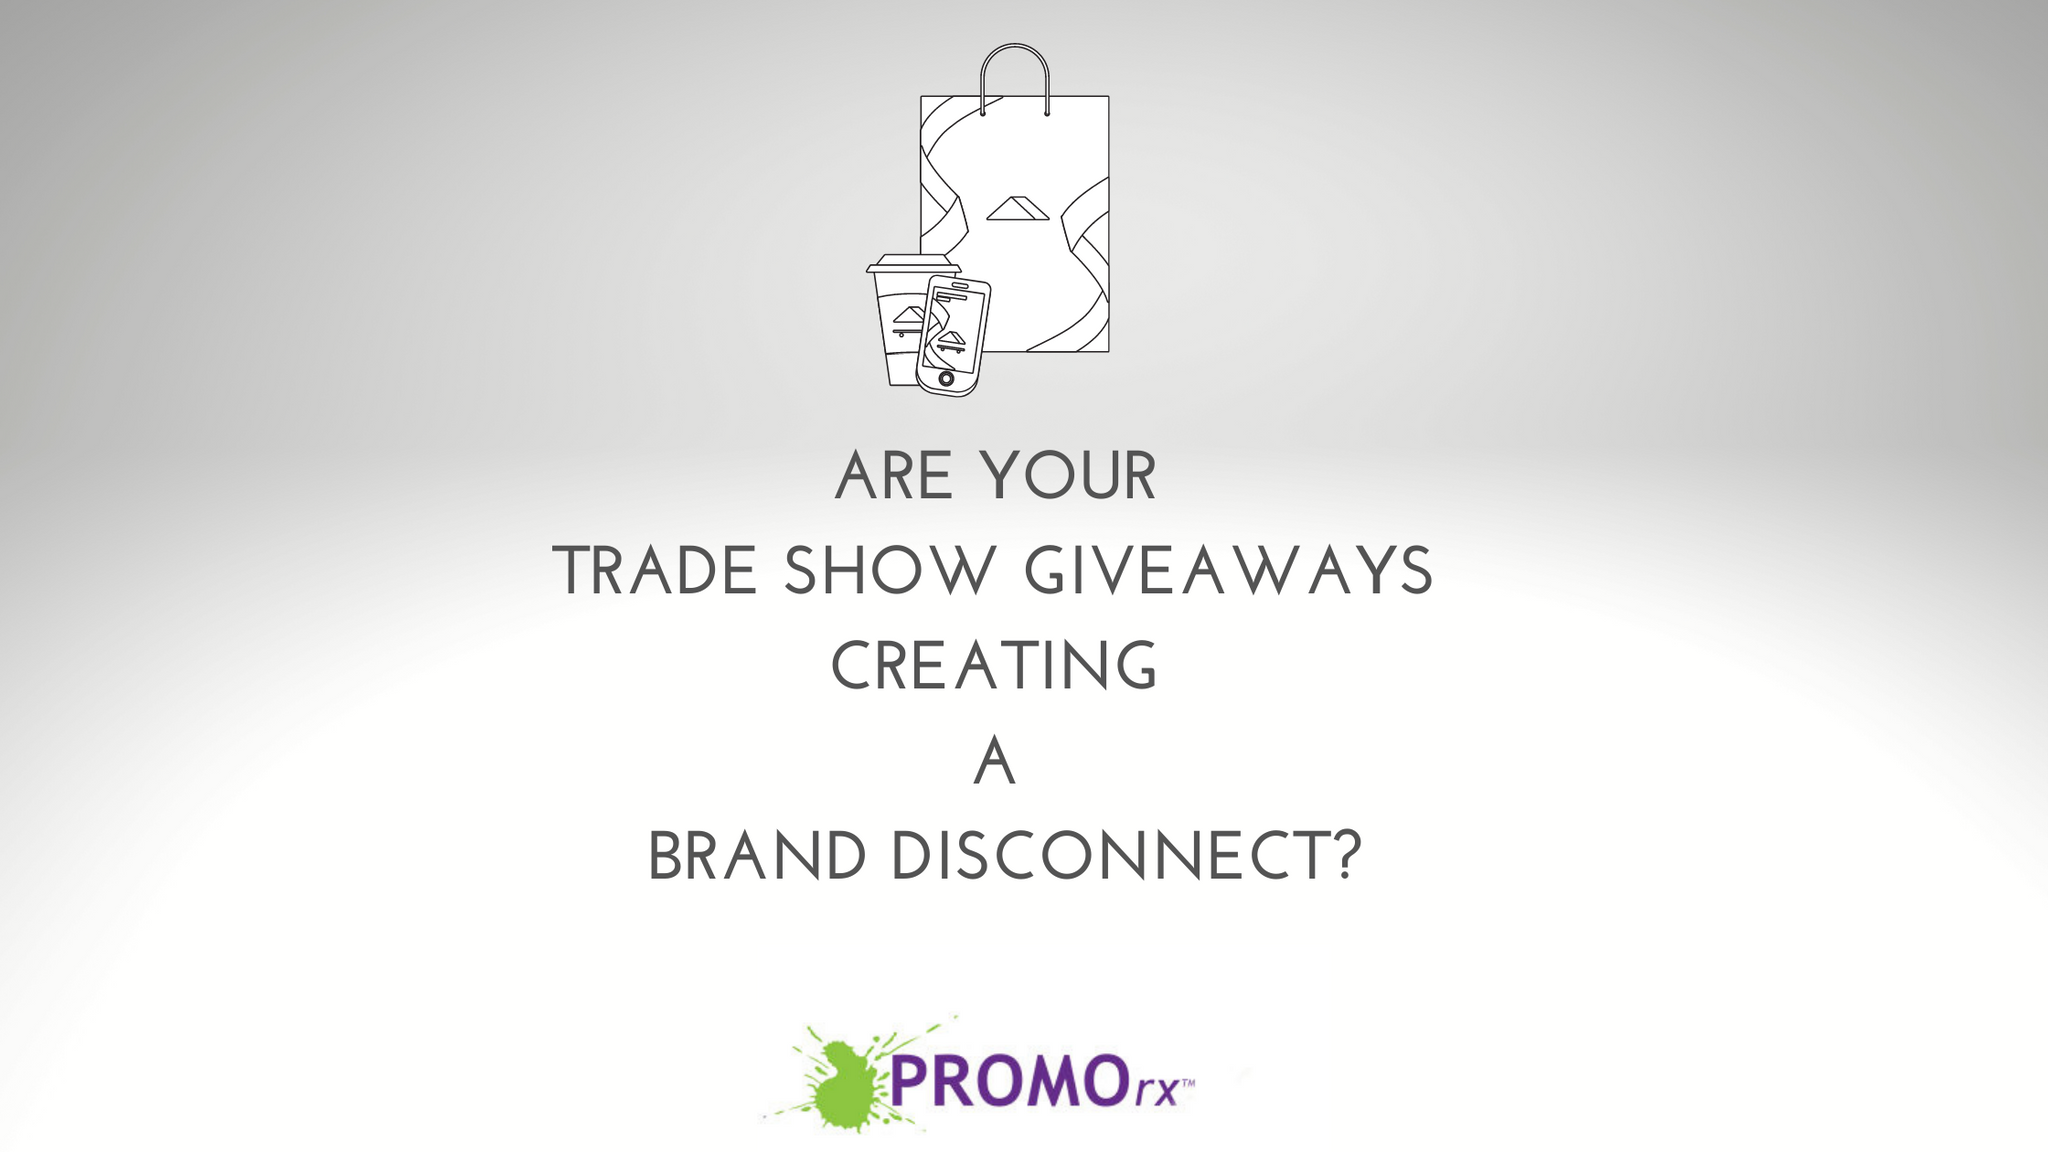 Are Your Trade Show Giveaways Creating a Brand Disconnect?